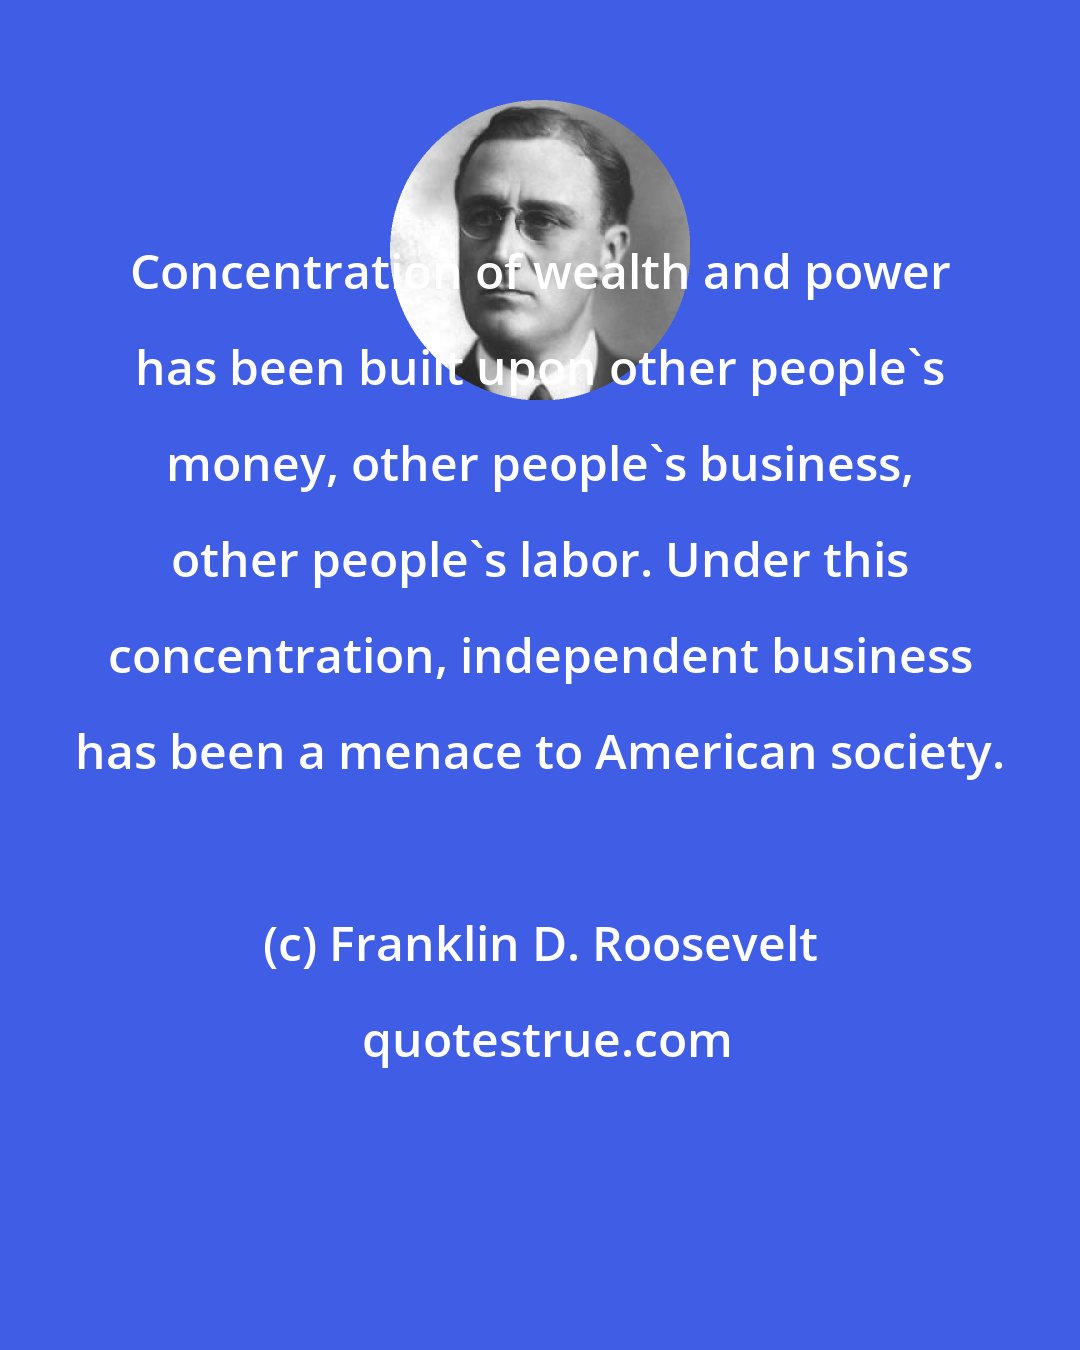 Franklin D. Roosevelt: Concentration of wealth and power has been built upon other people's money, other people's business, other people's labor. Under this concentration, independent business has been a menace to American society.